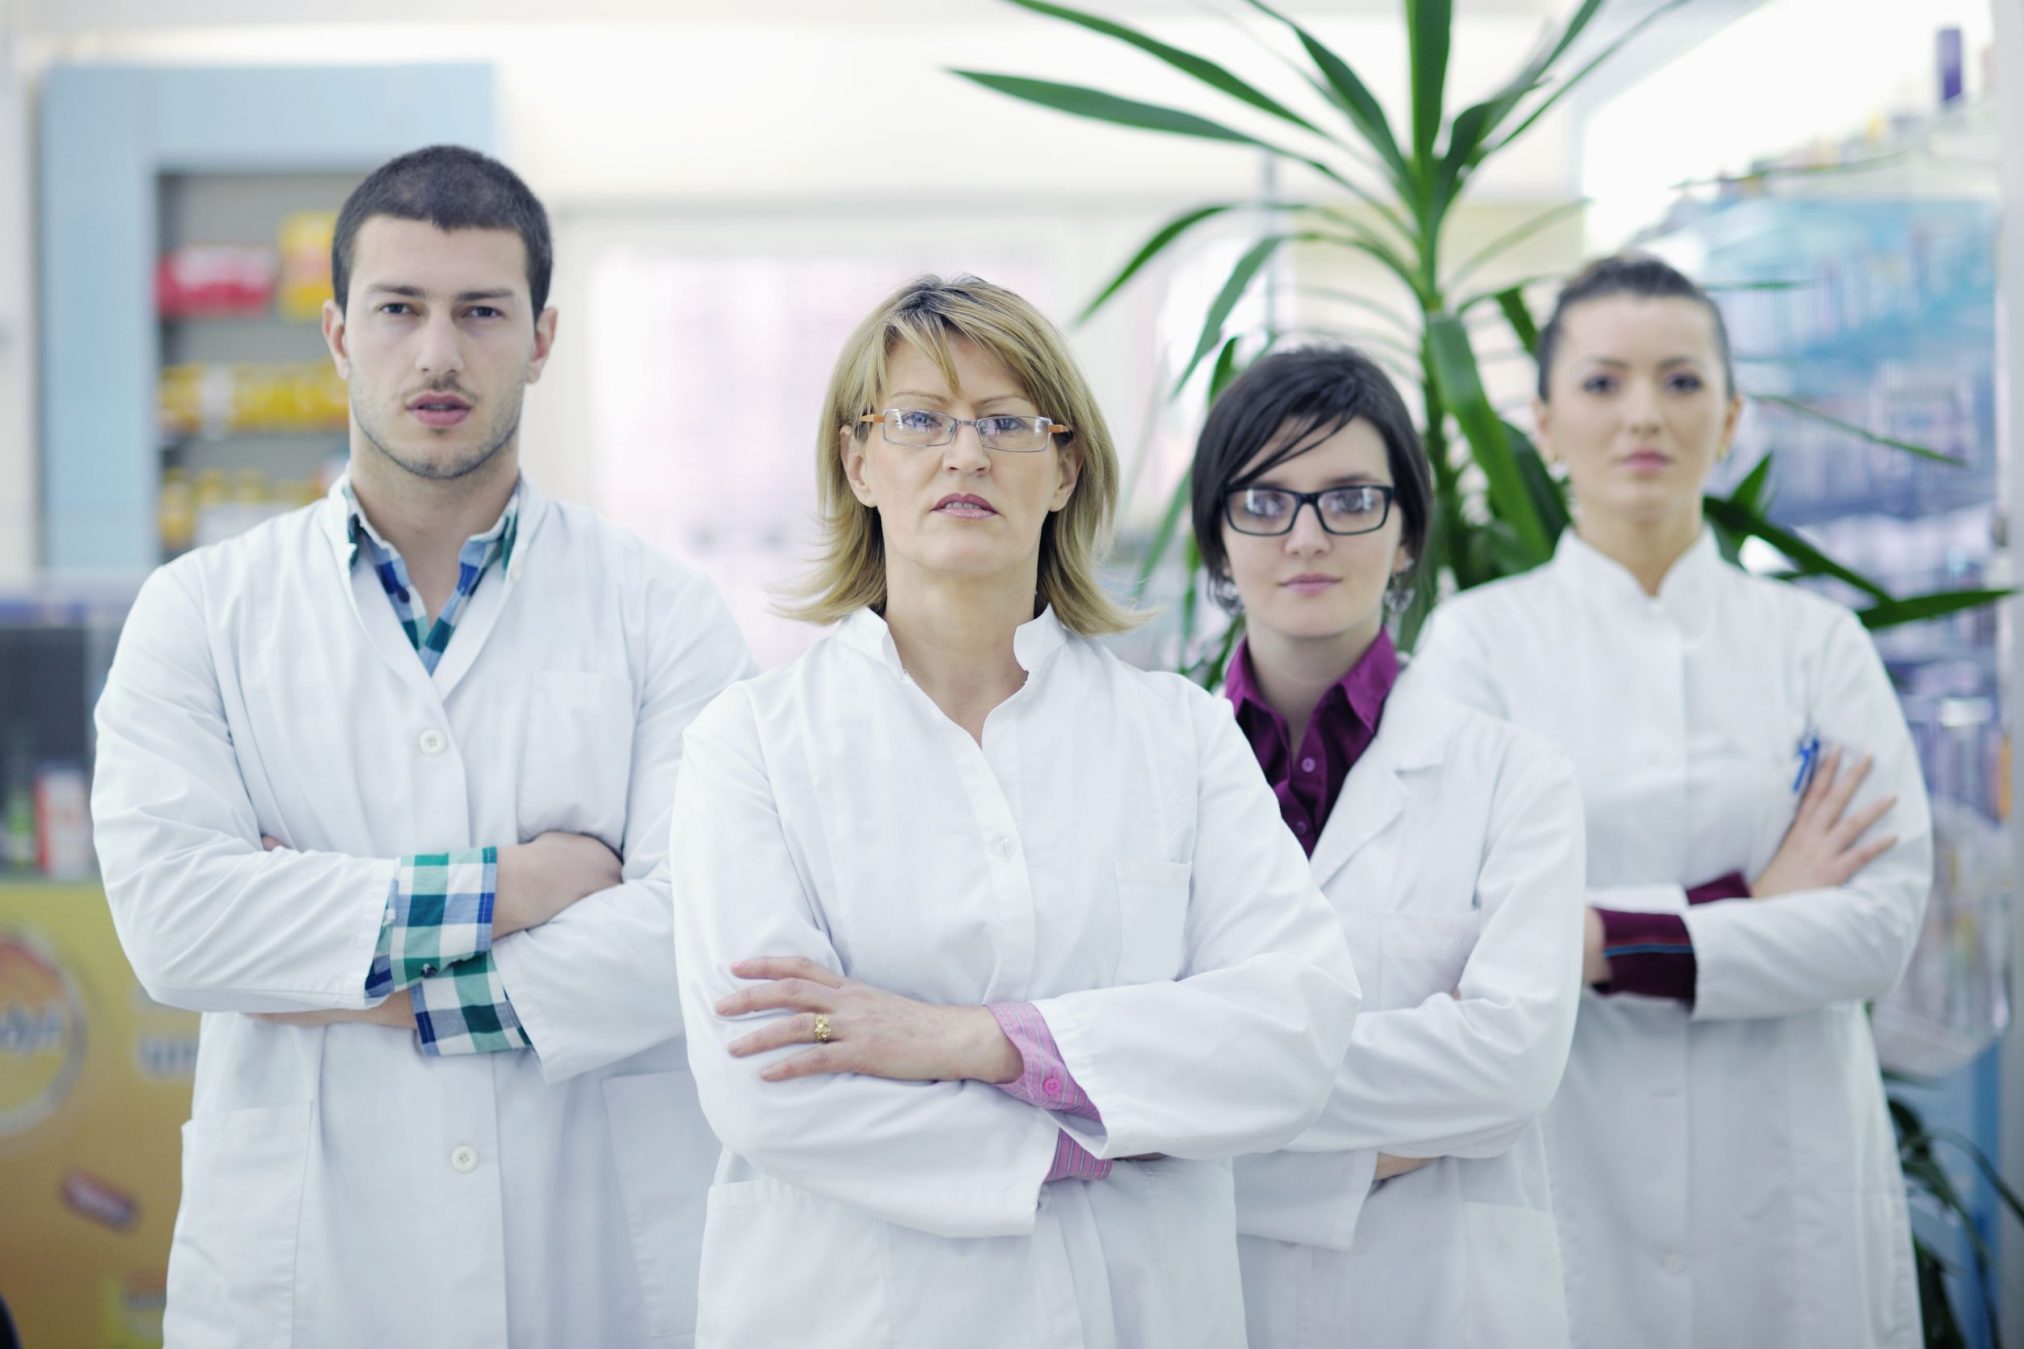 four unfriendly-looking pharmacists